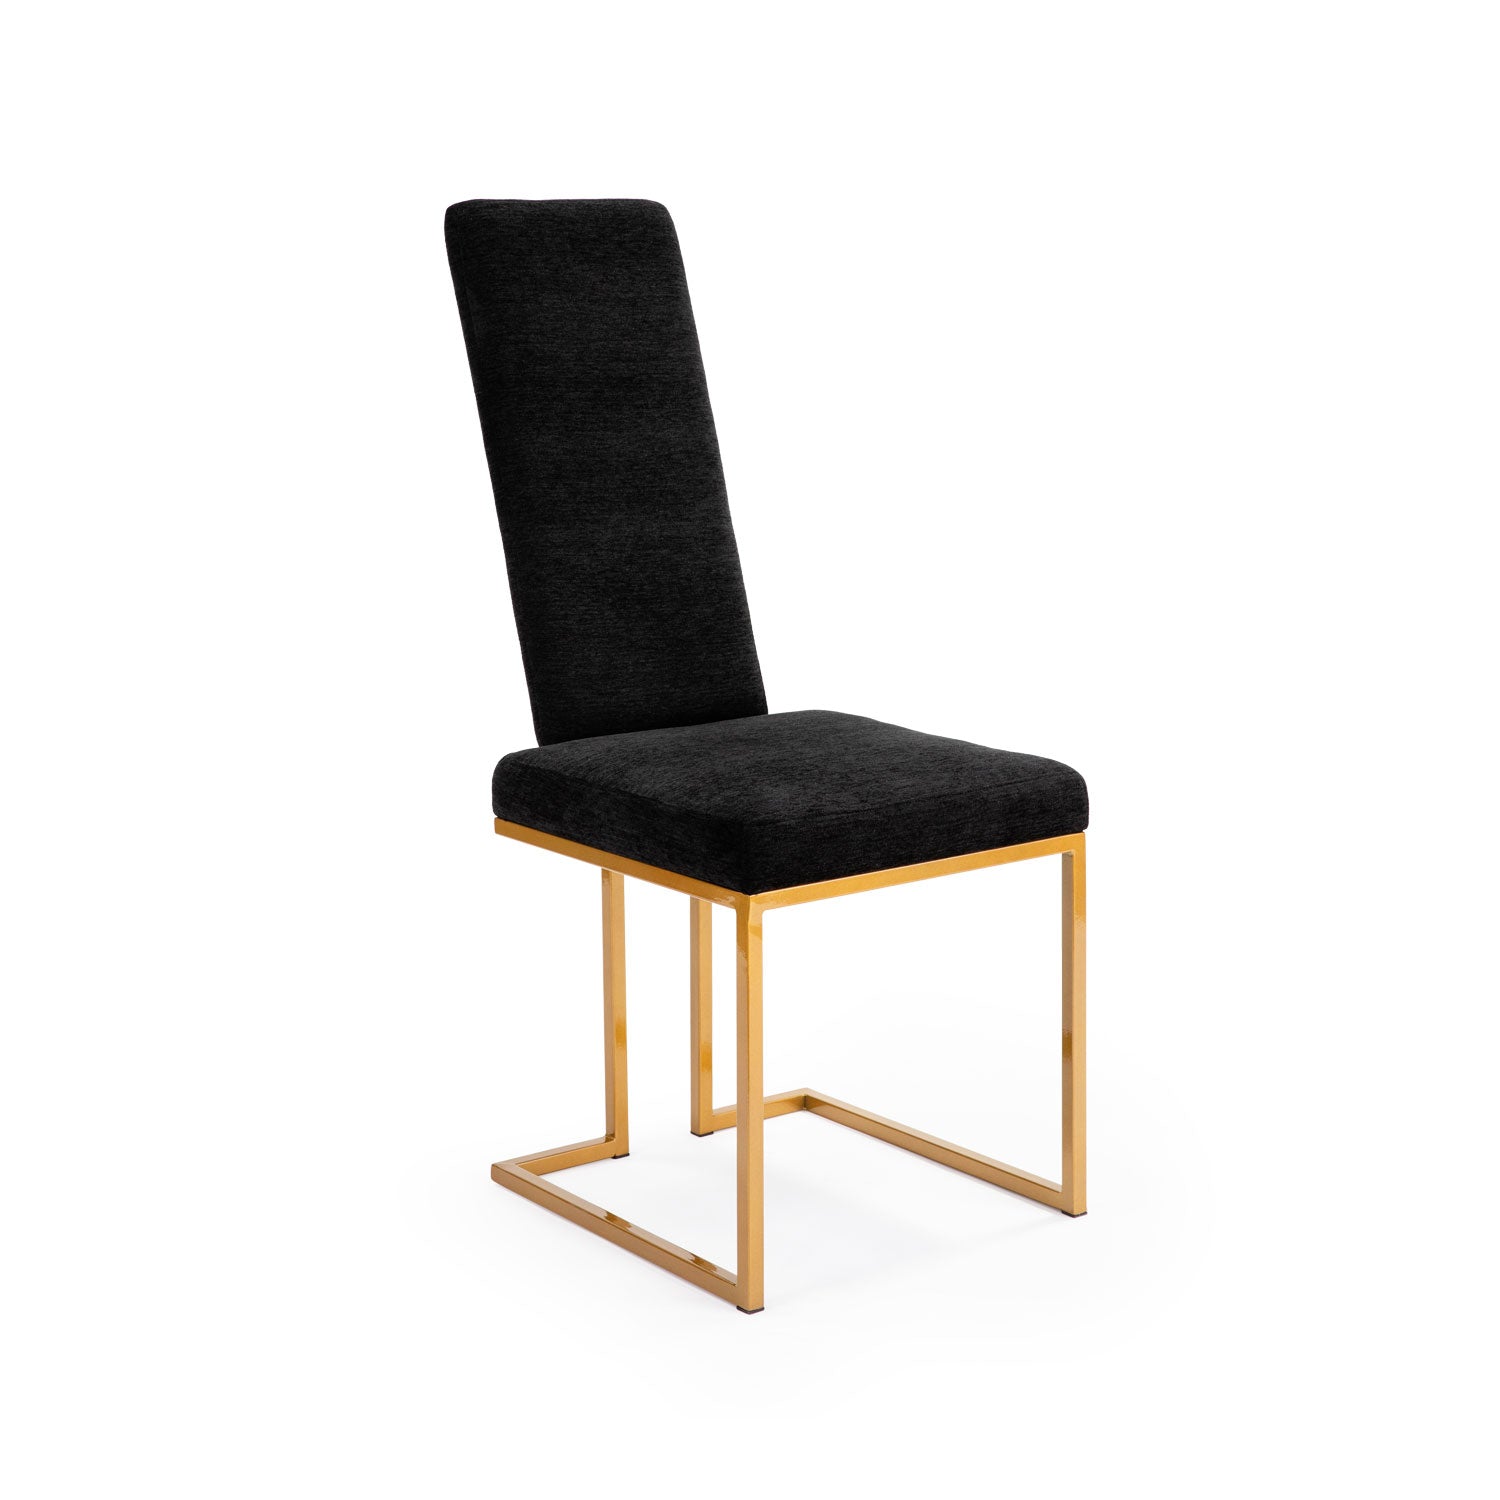 Wesley Allen Brentwood Chair in Mid Black Fabric and Sheen Gold Finish